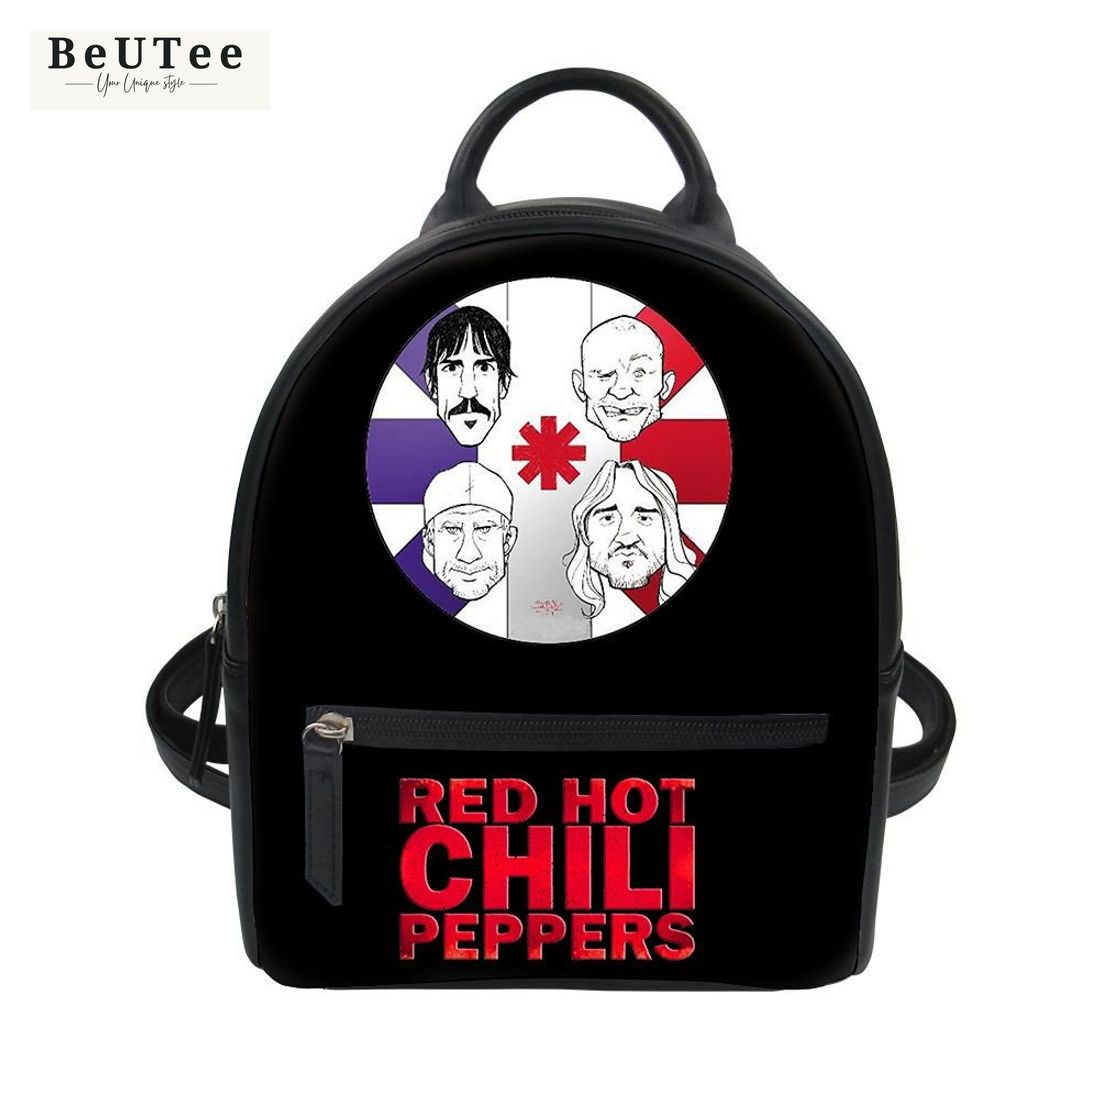 red hot chili peppers black leisure backpack 1 7l5wH